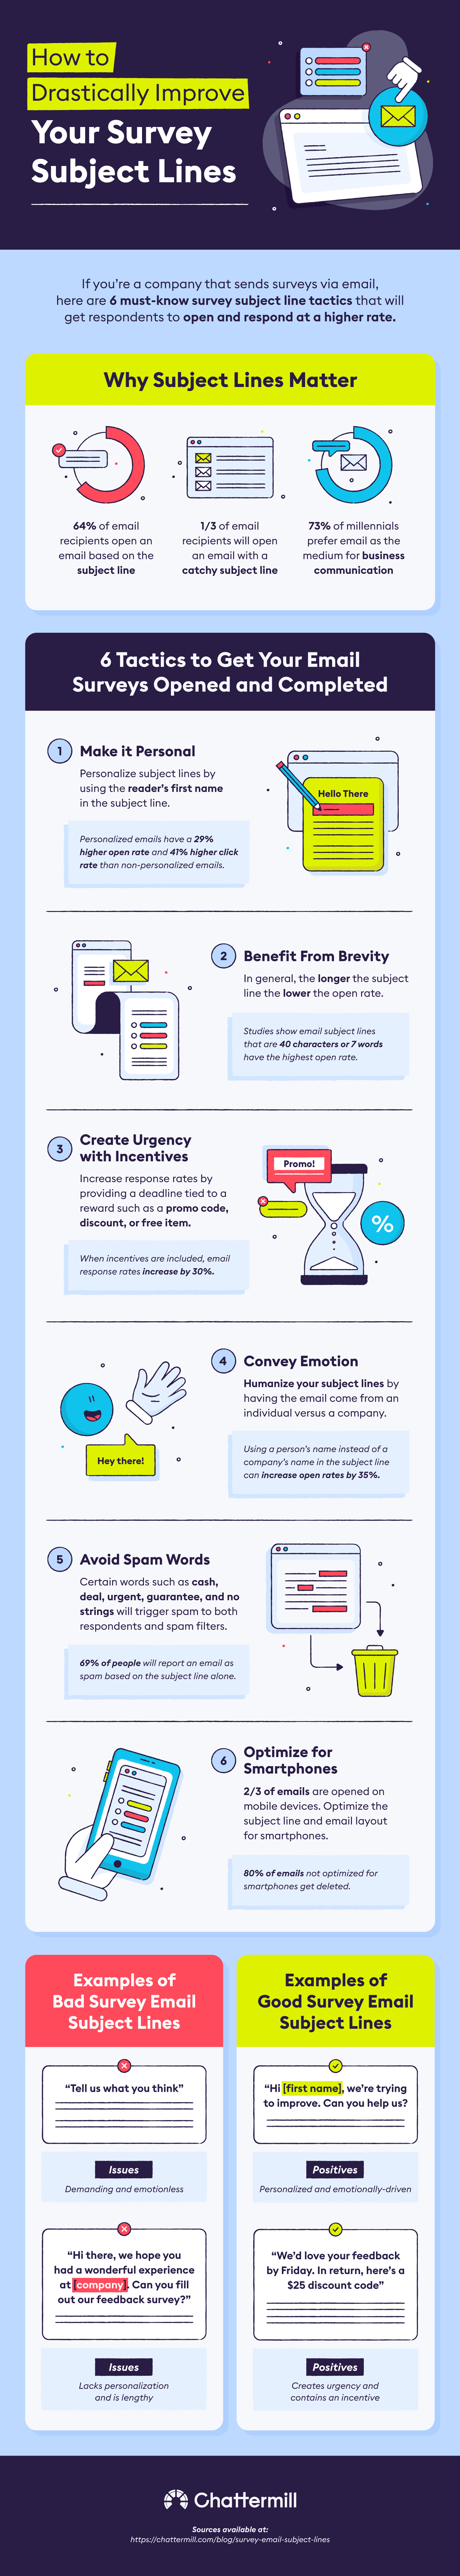 customer-survey-subject-lines-infographic.png